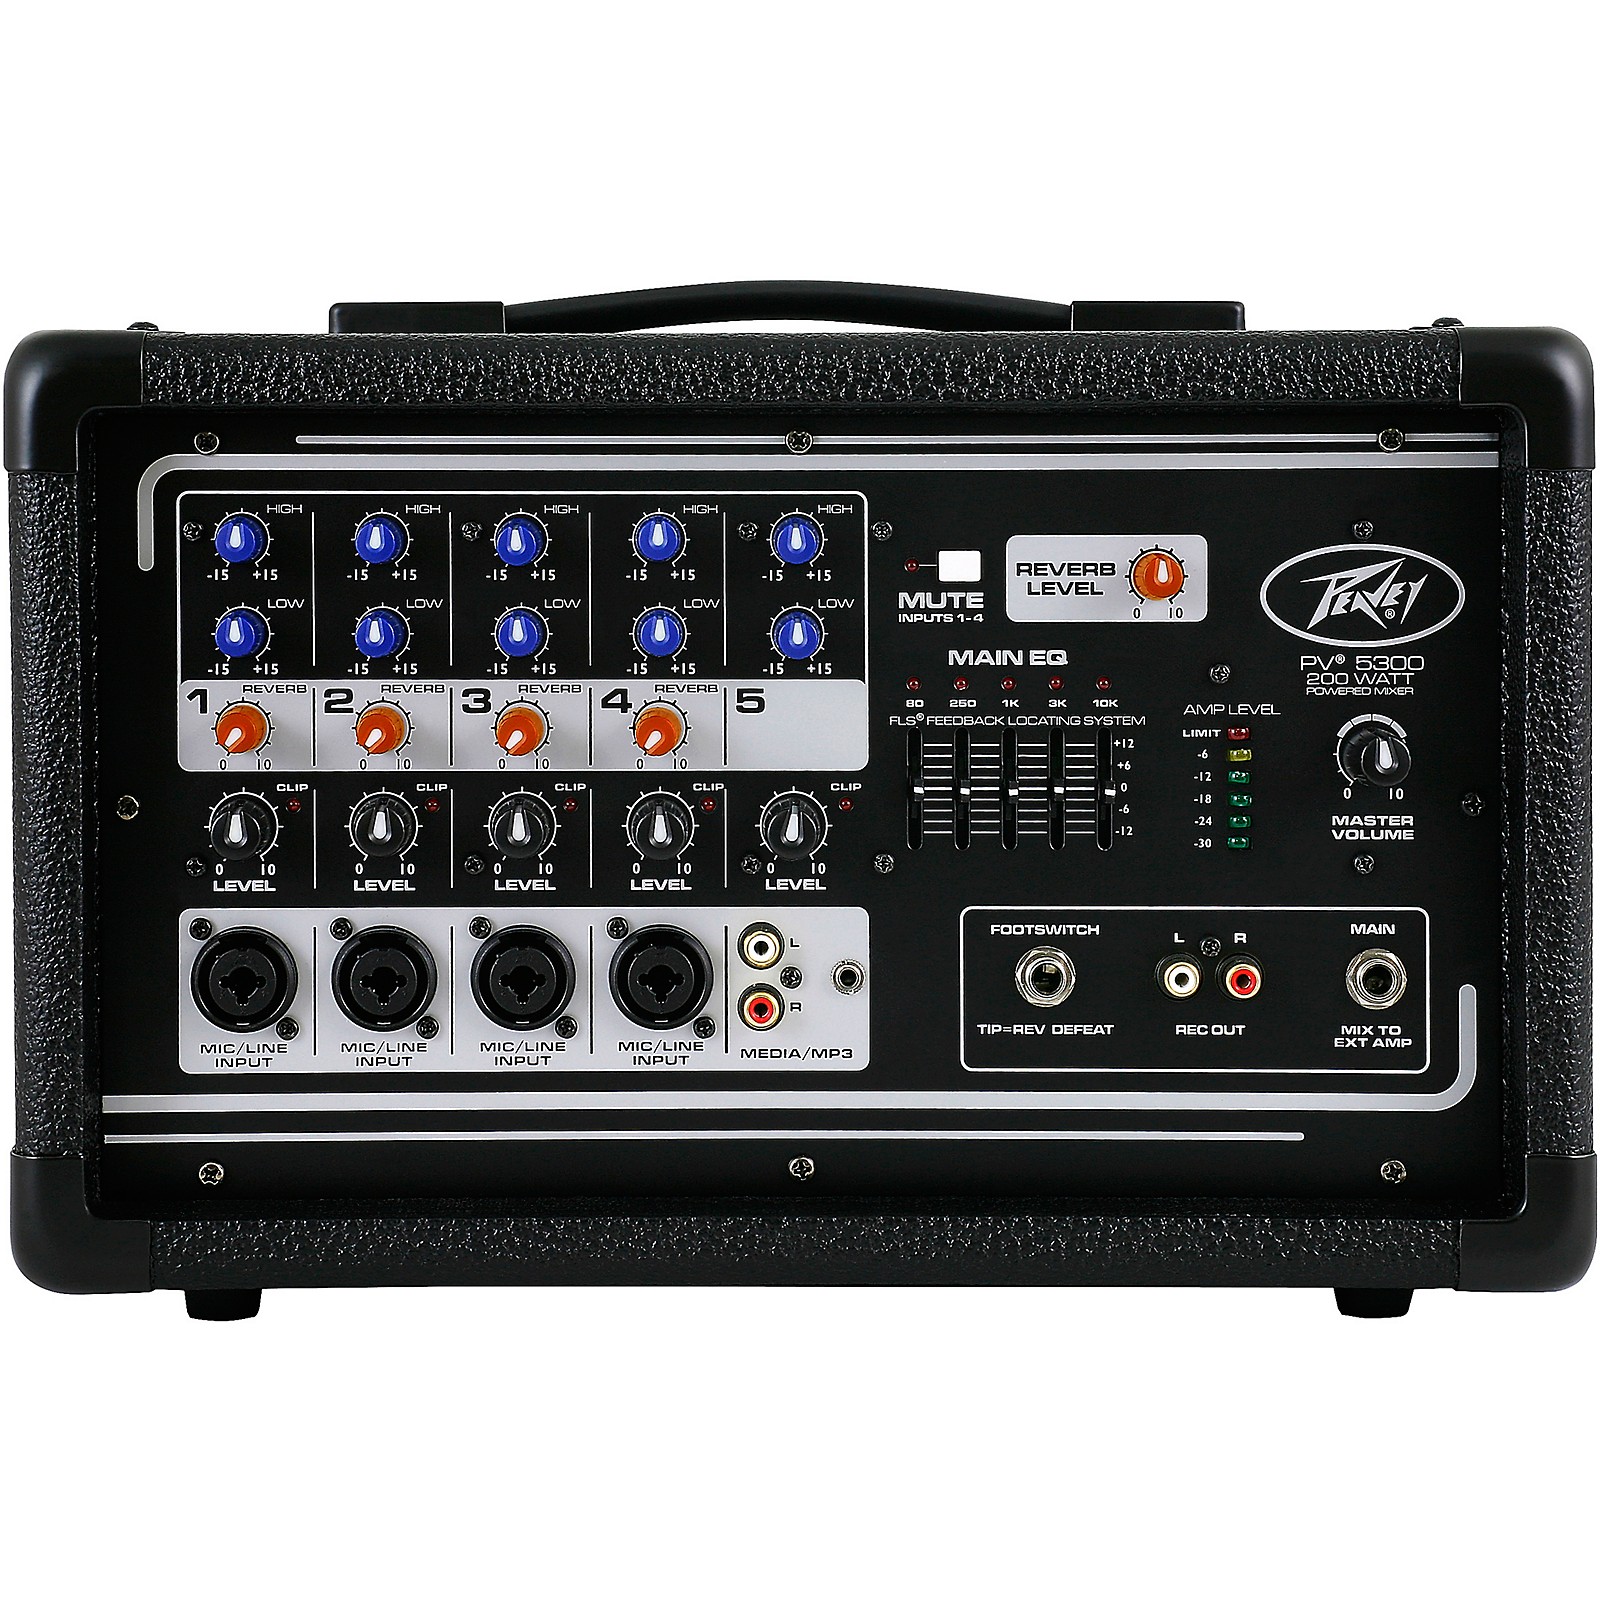 Peavey PV 5300 5-Channel Powered Mixer | Guitar Center